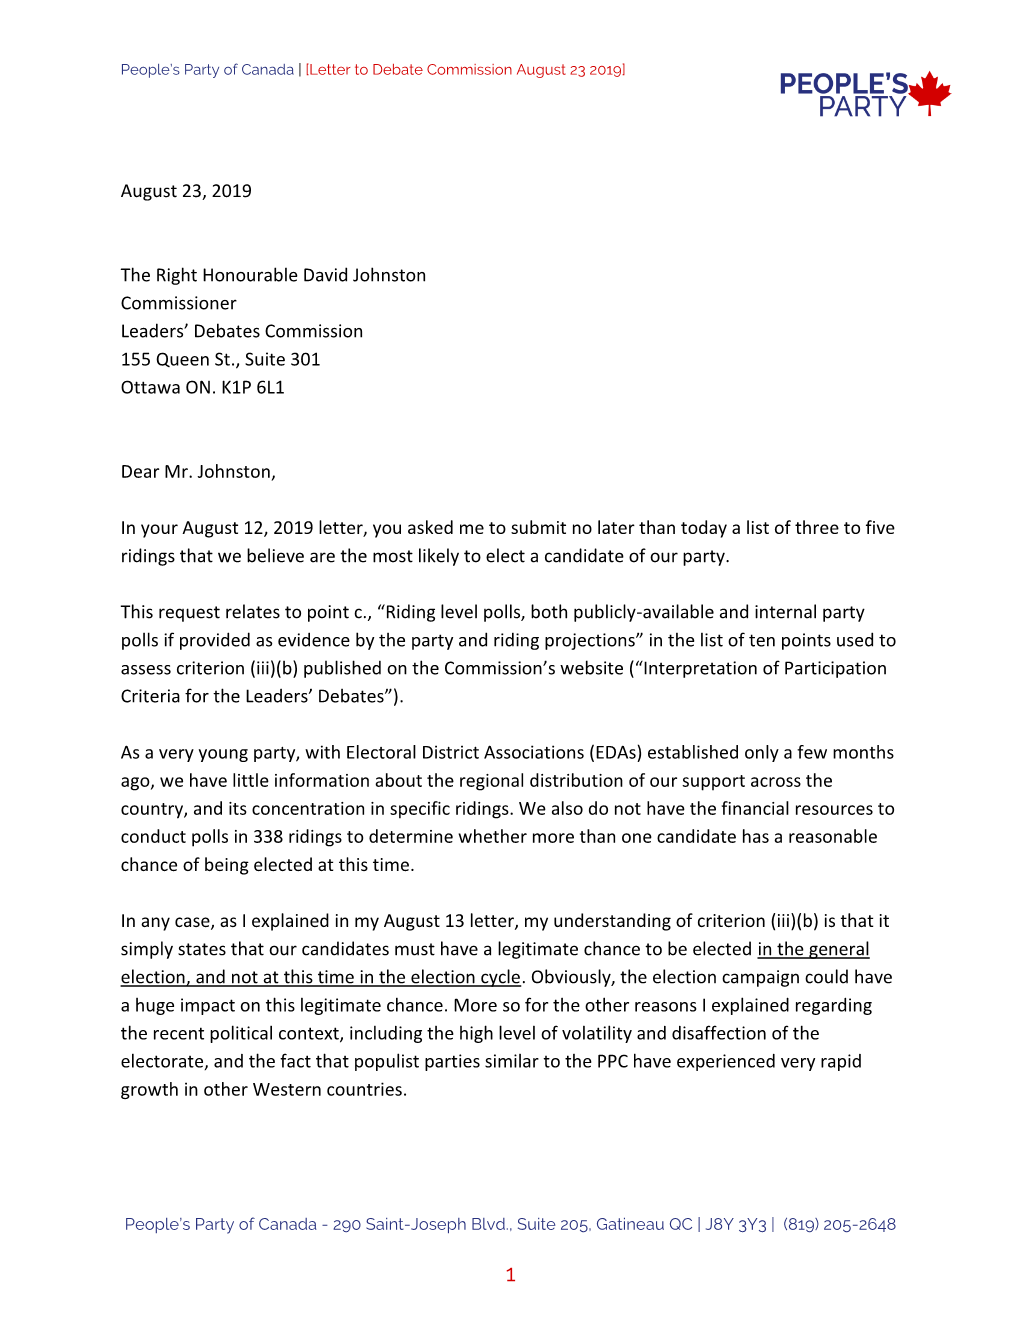 Letter to Debate Commission August 23, 2019